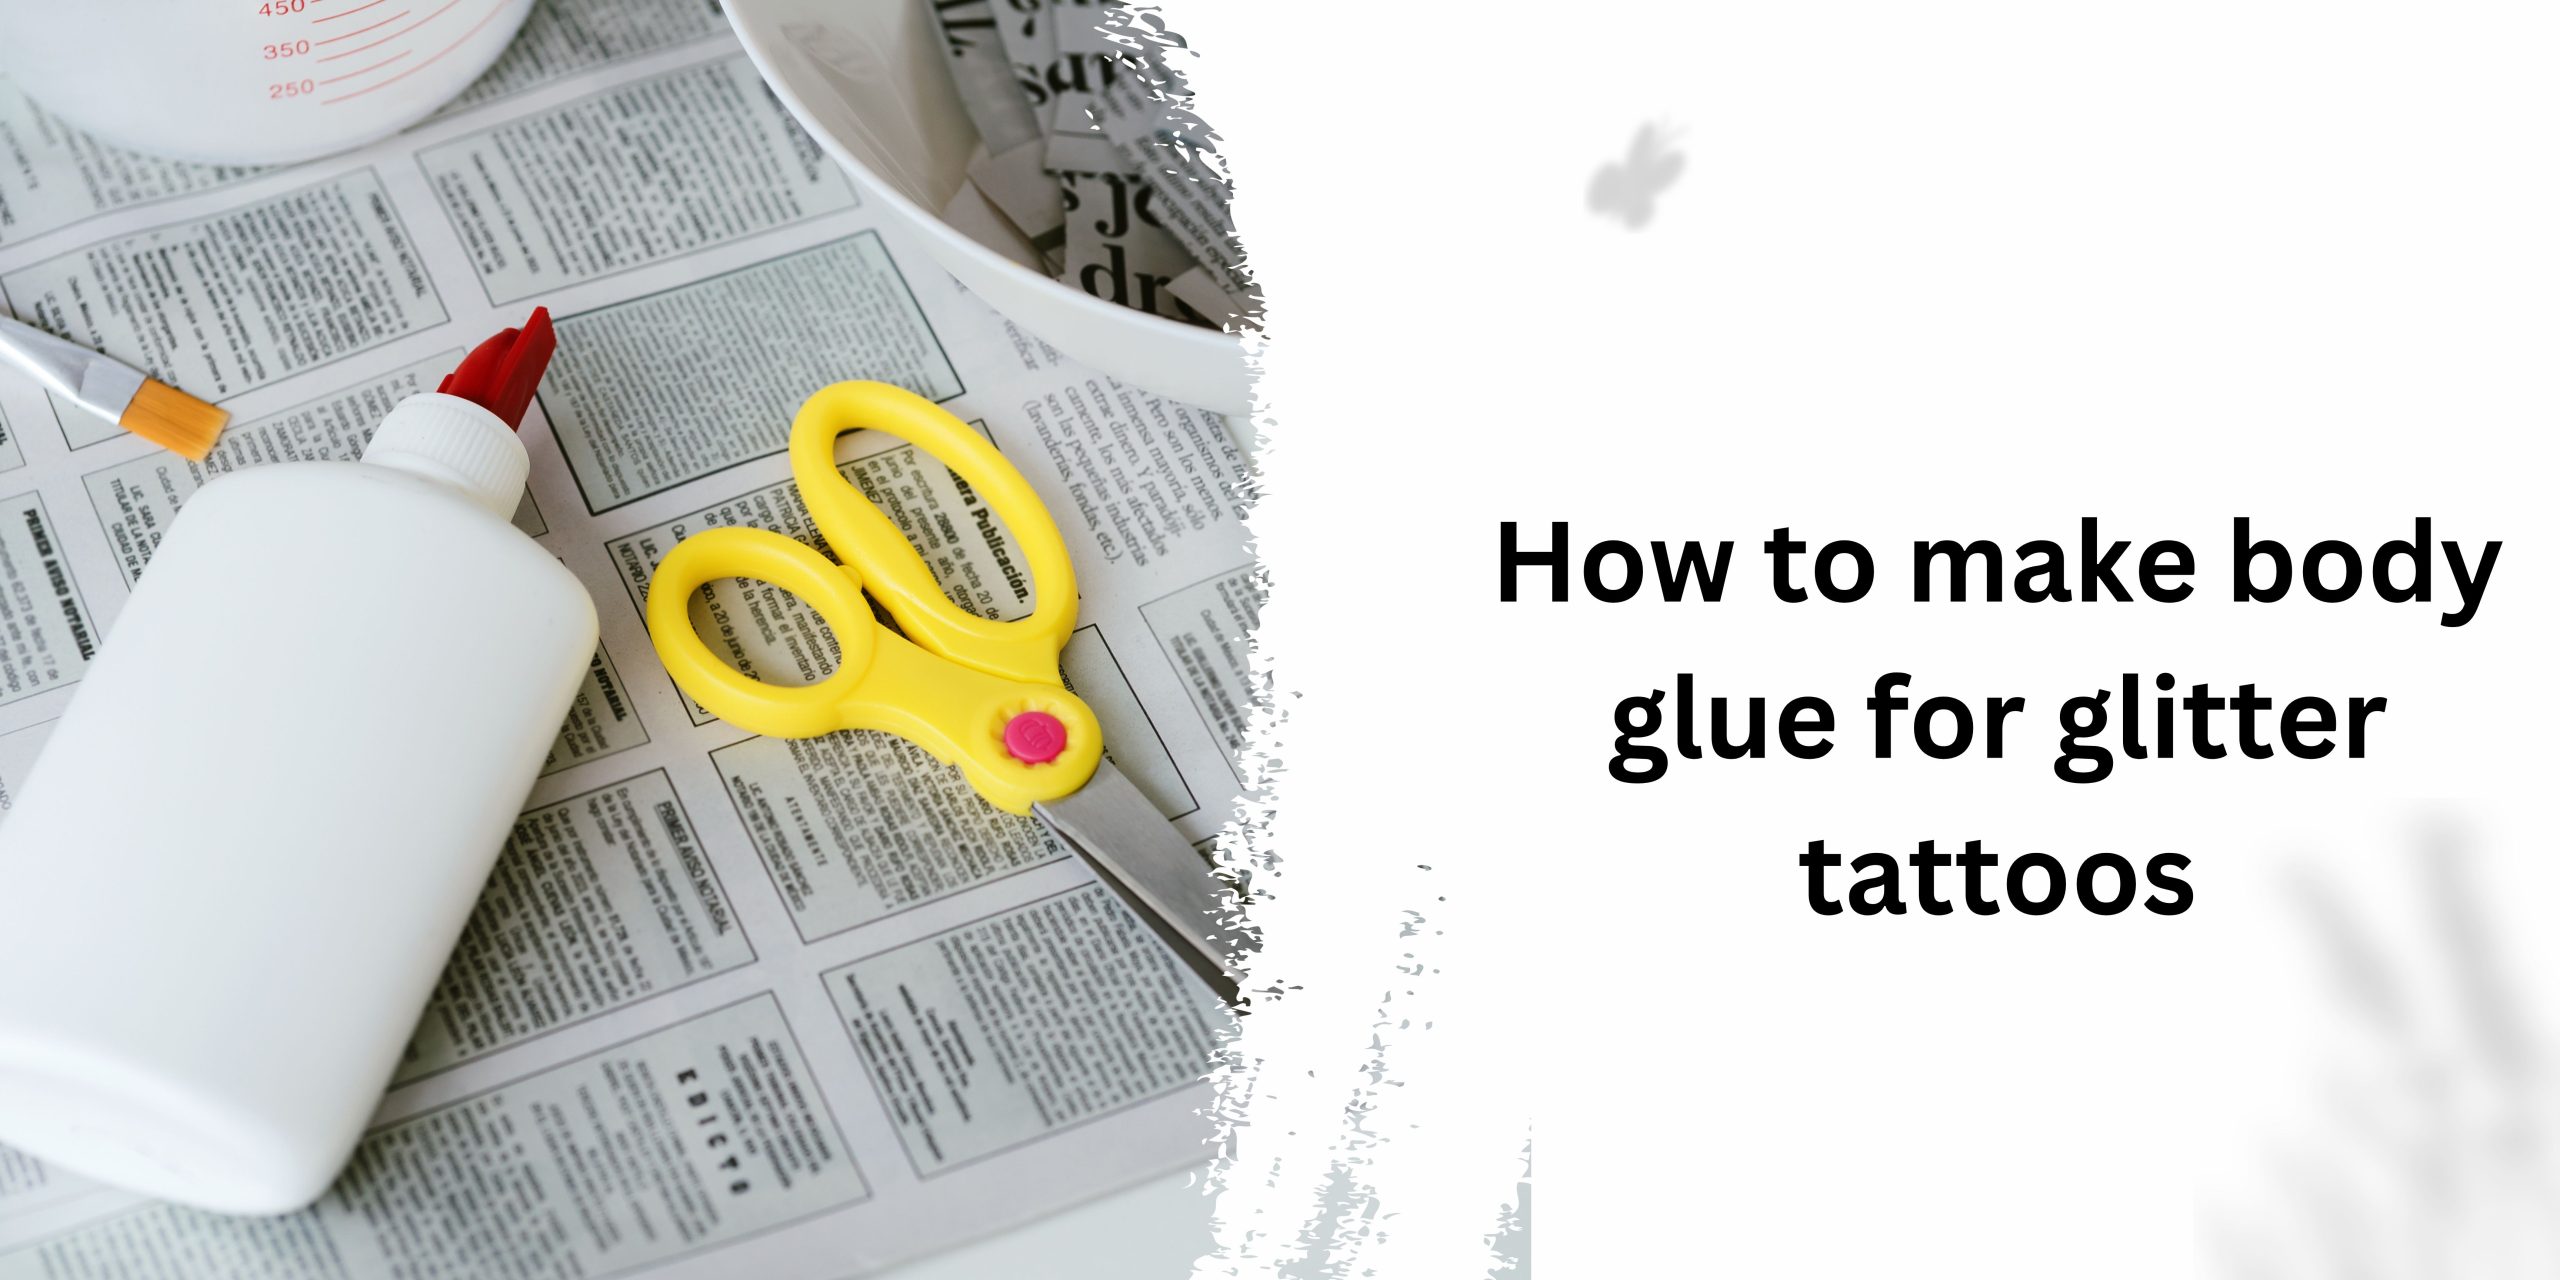 How to make body glue for glitter tattoos